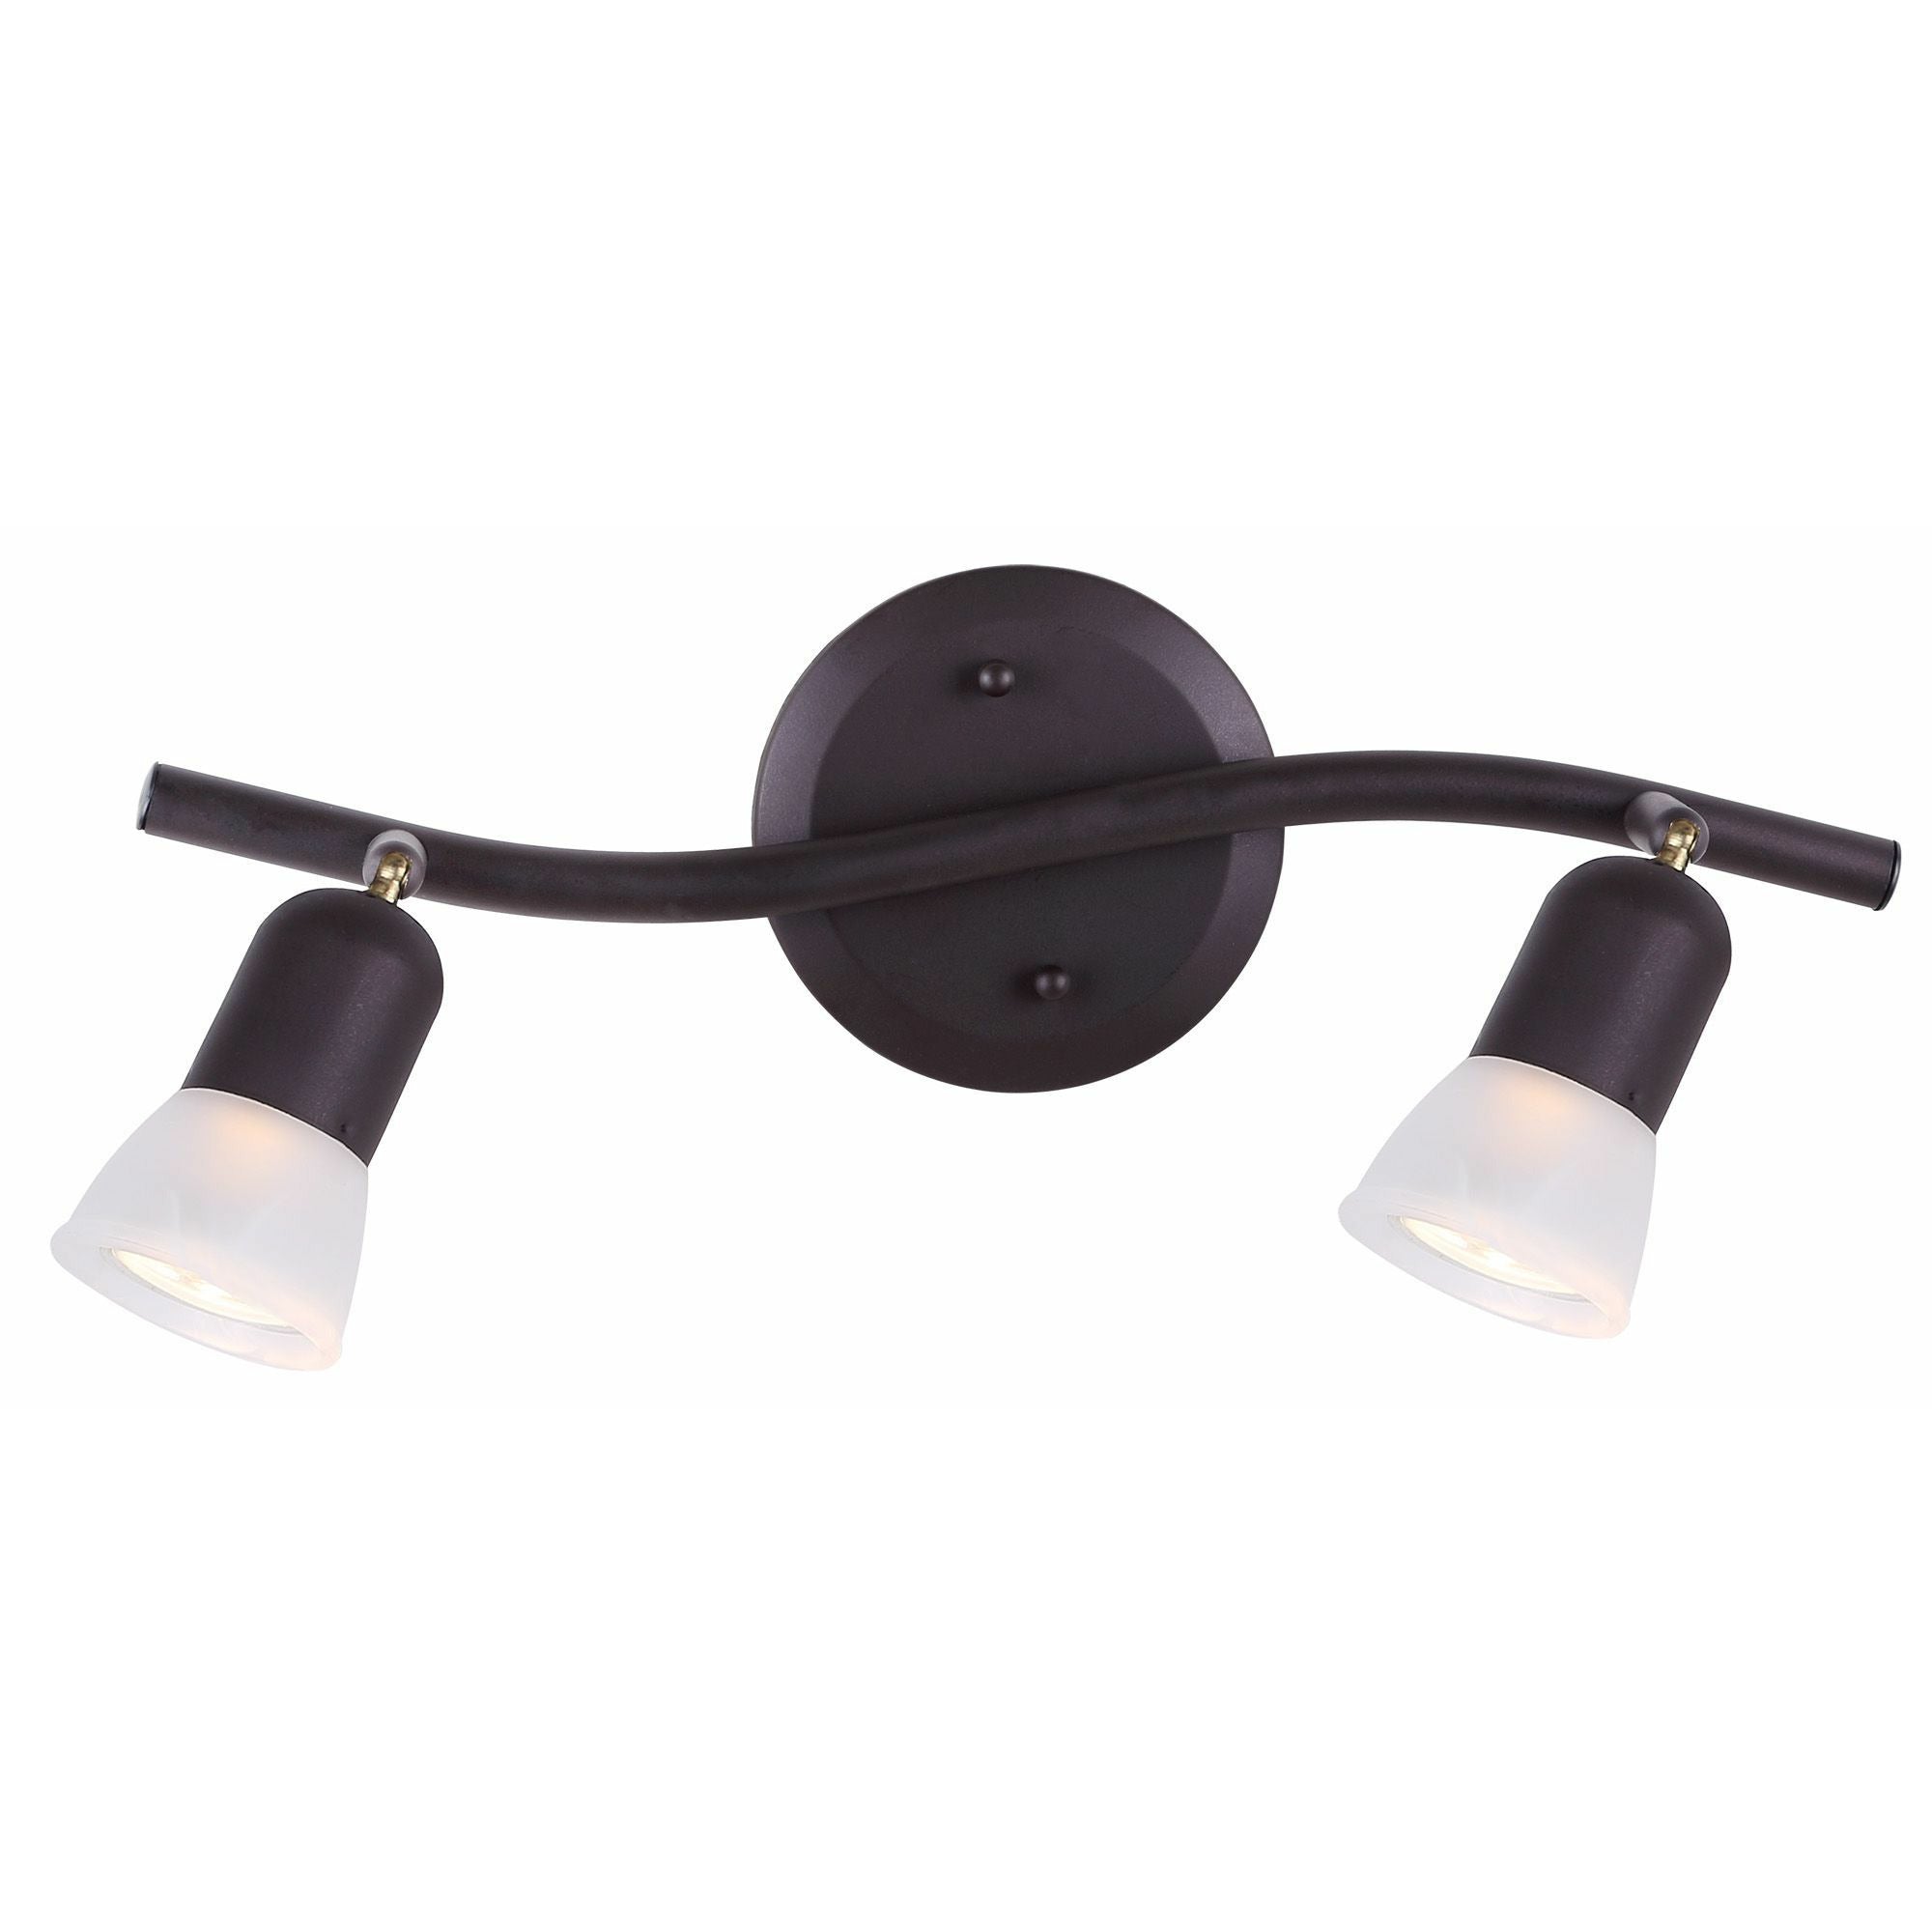 James Fixed Oil Rubbed Bronze